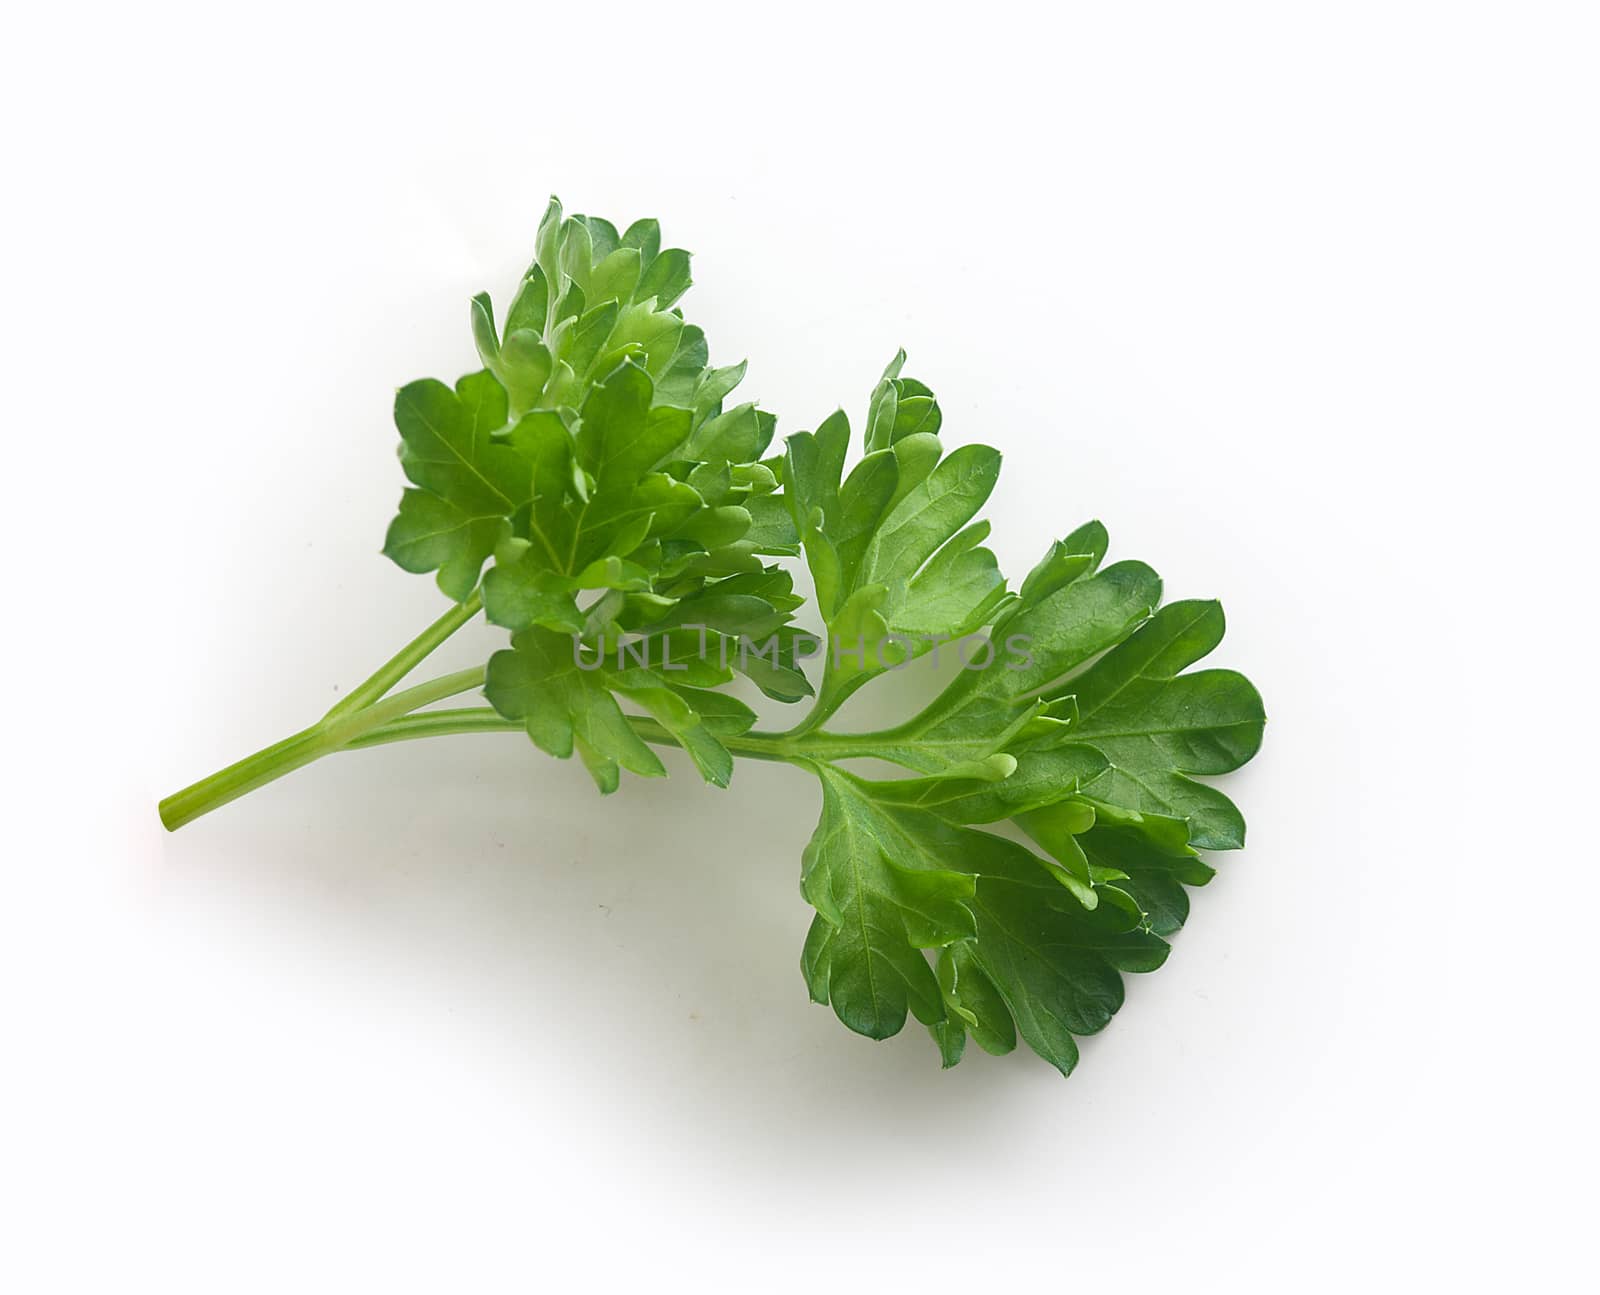 Green branch of parsley by Angorius